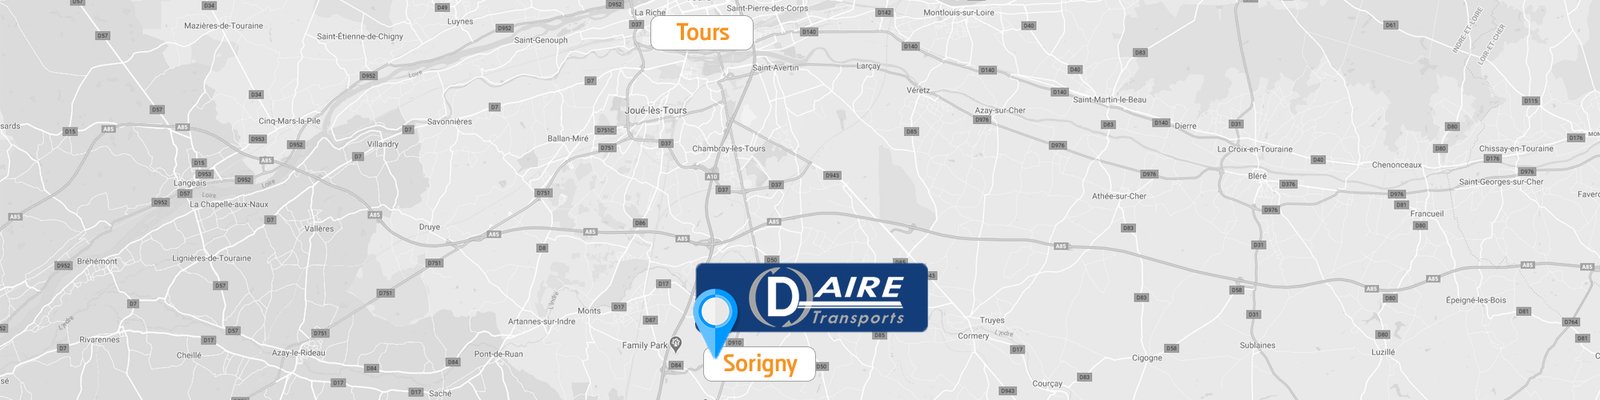 tcda-page-contact-map-transports-daire